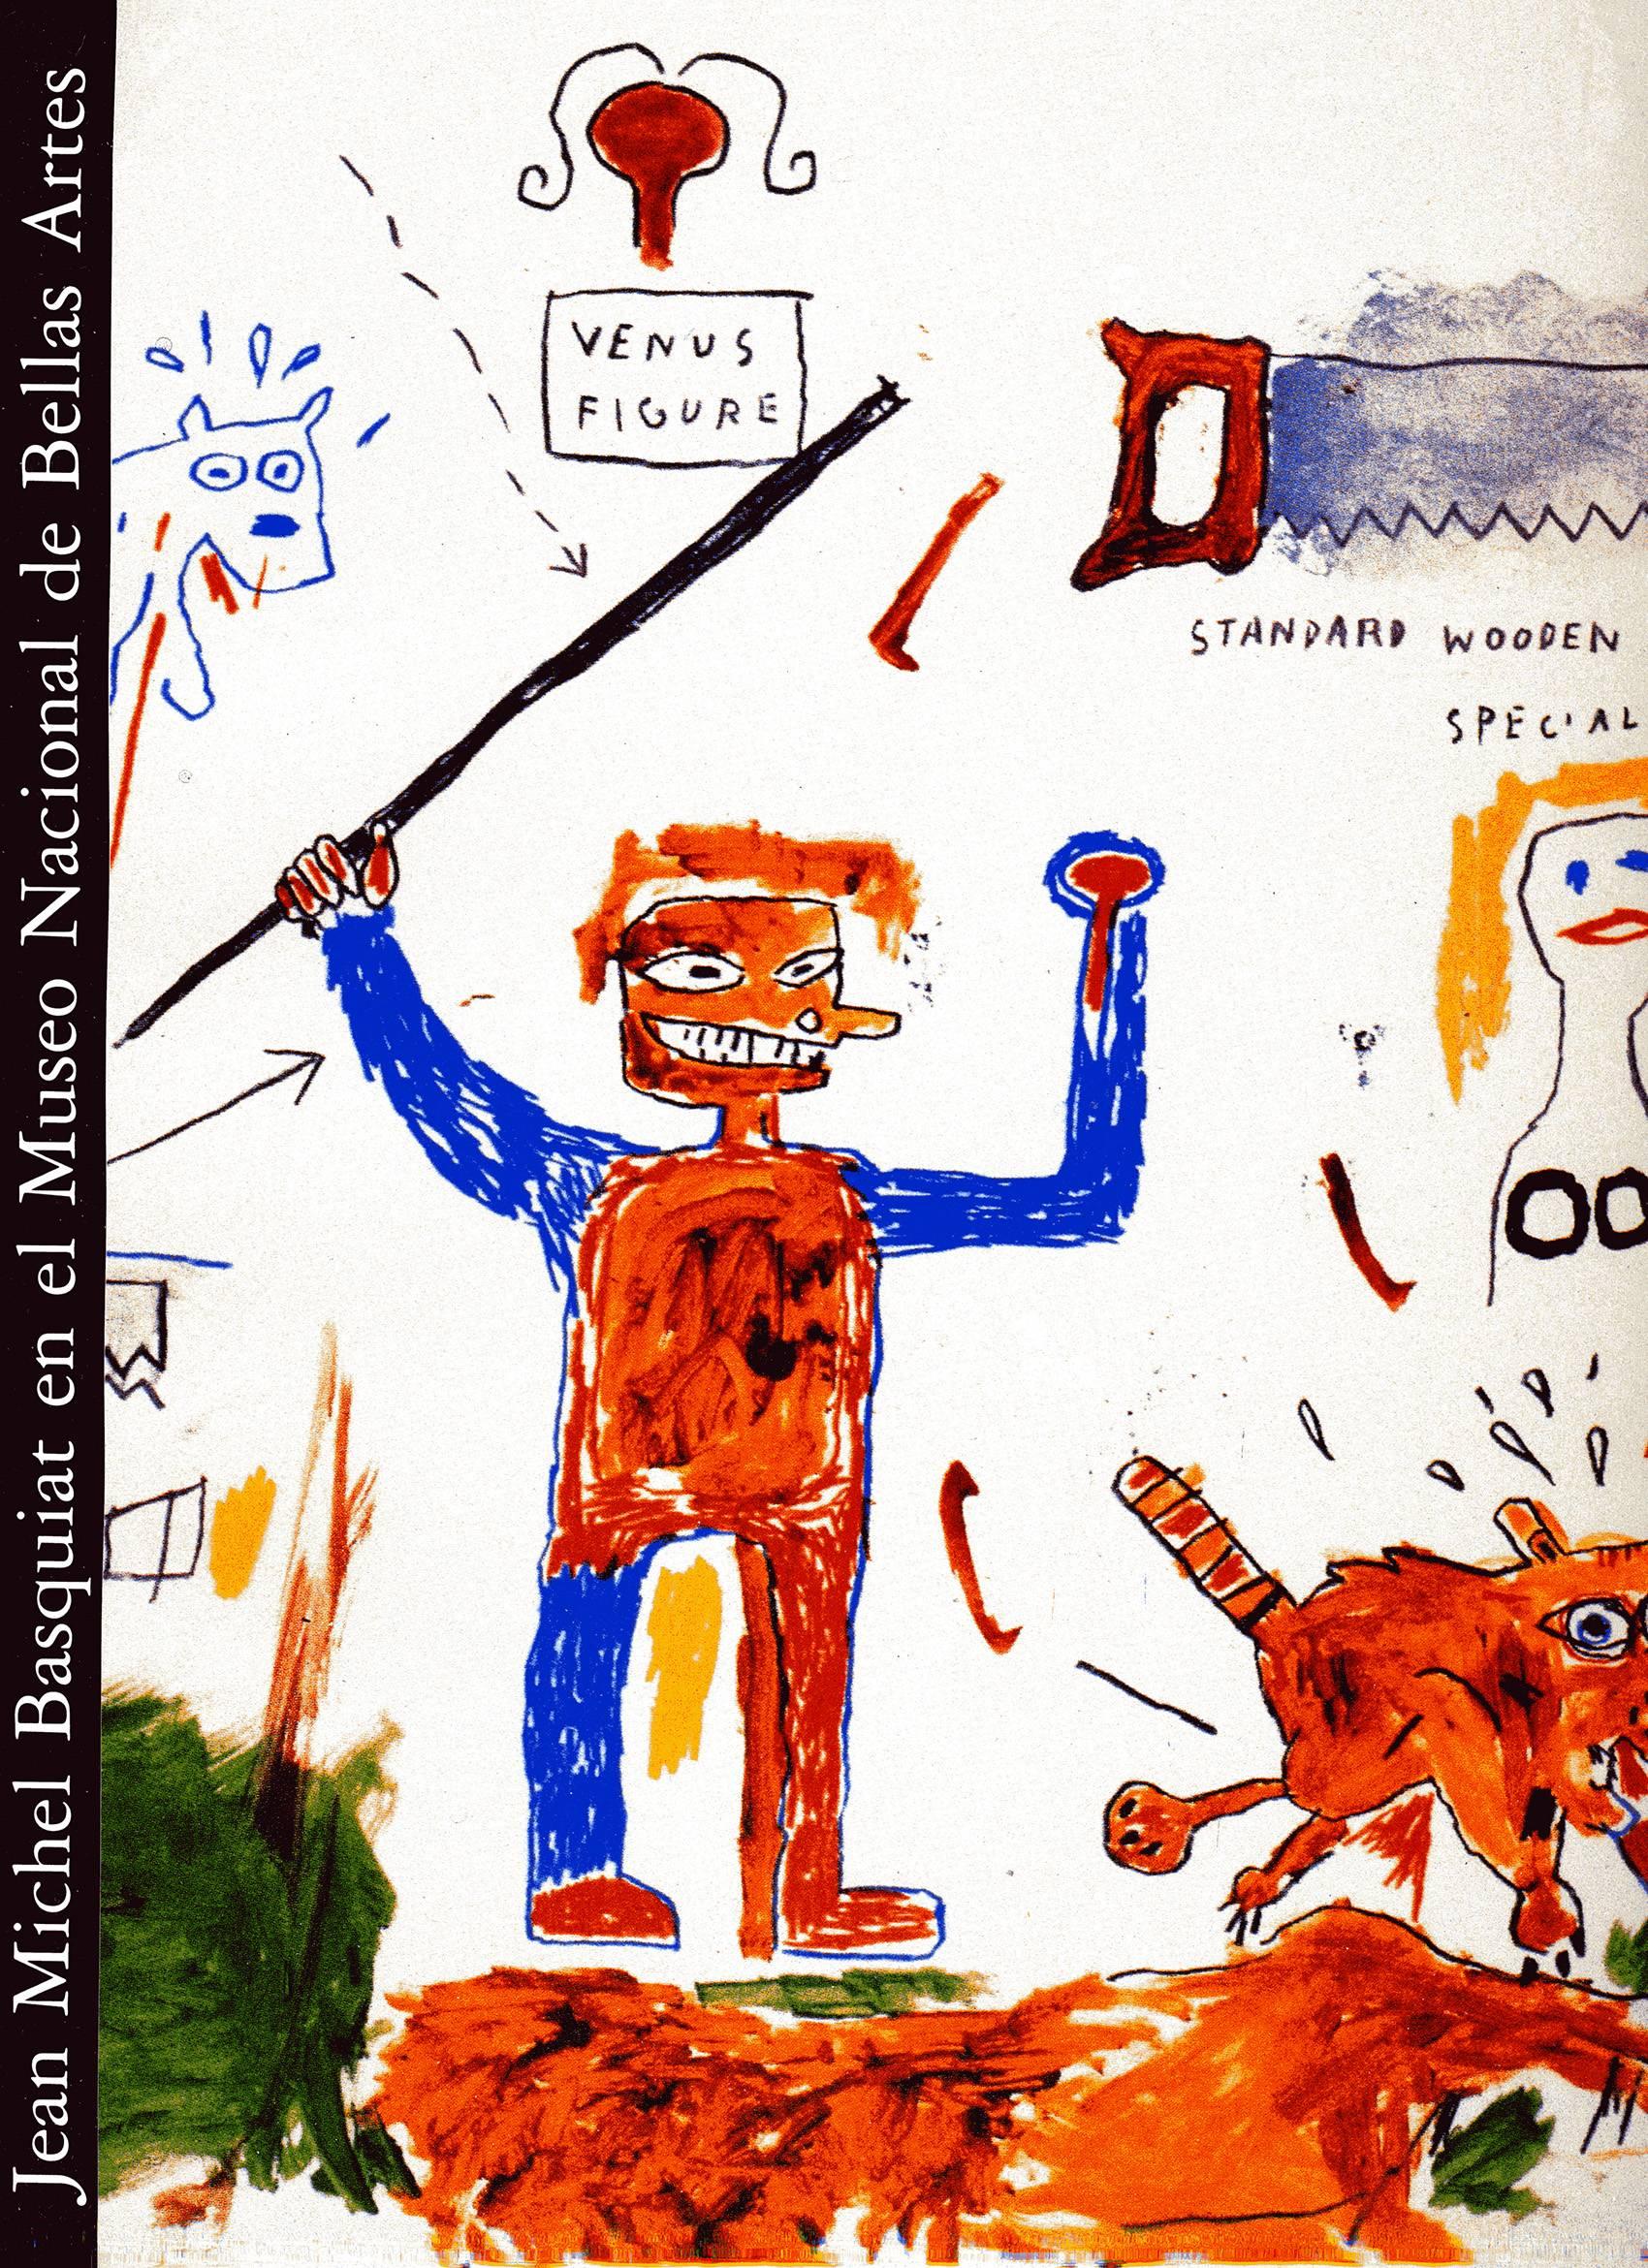 Basquiat Works on Paper Catalog, Buenos Aires - Print by after Jean-Michel Basquiat